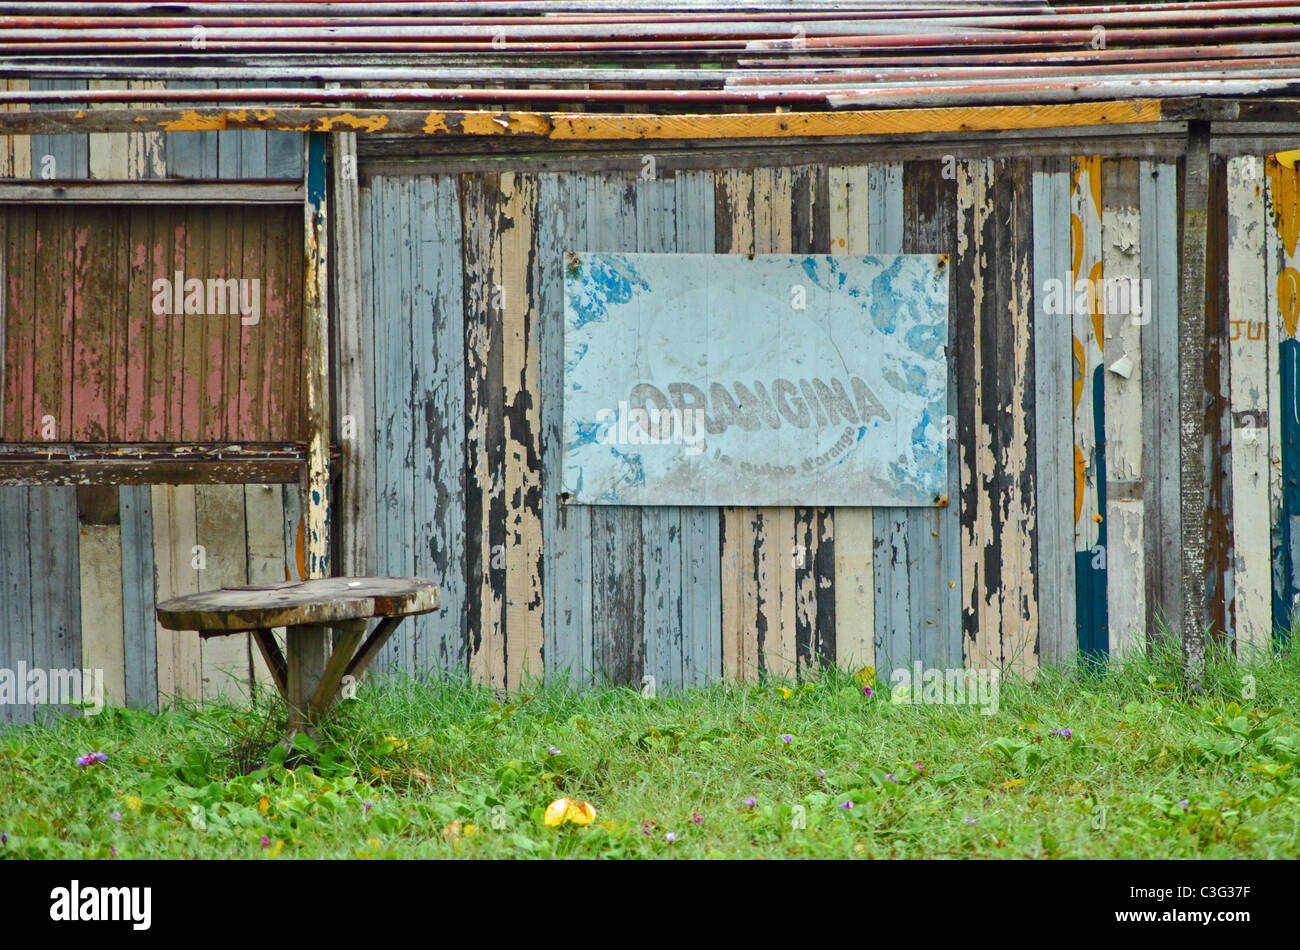 Derelict cafe with faded Orangina oster, Ivory Coast, West Africa Stock Photo